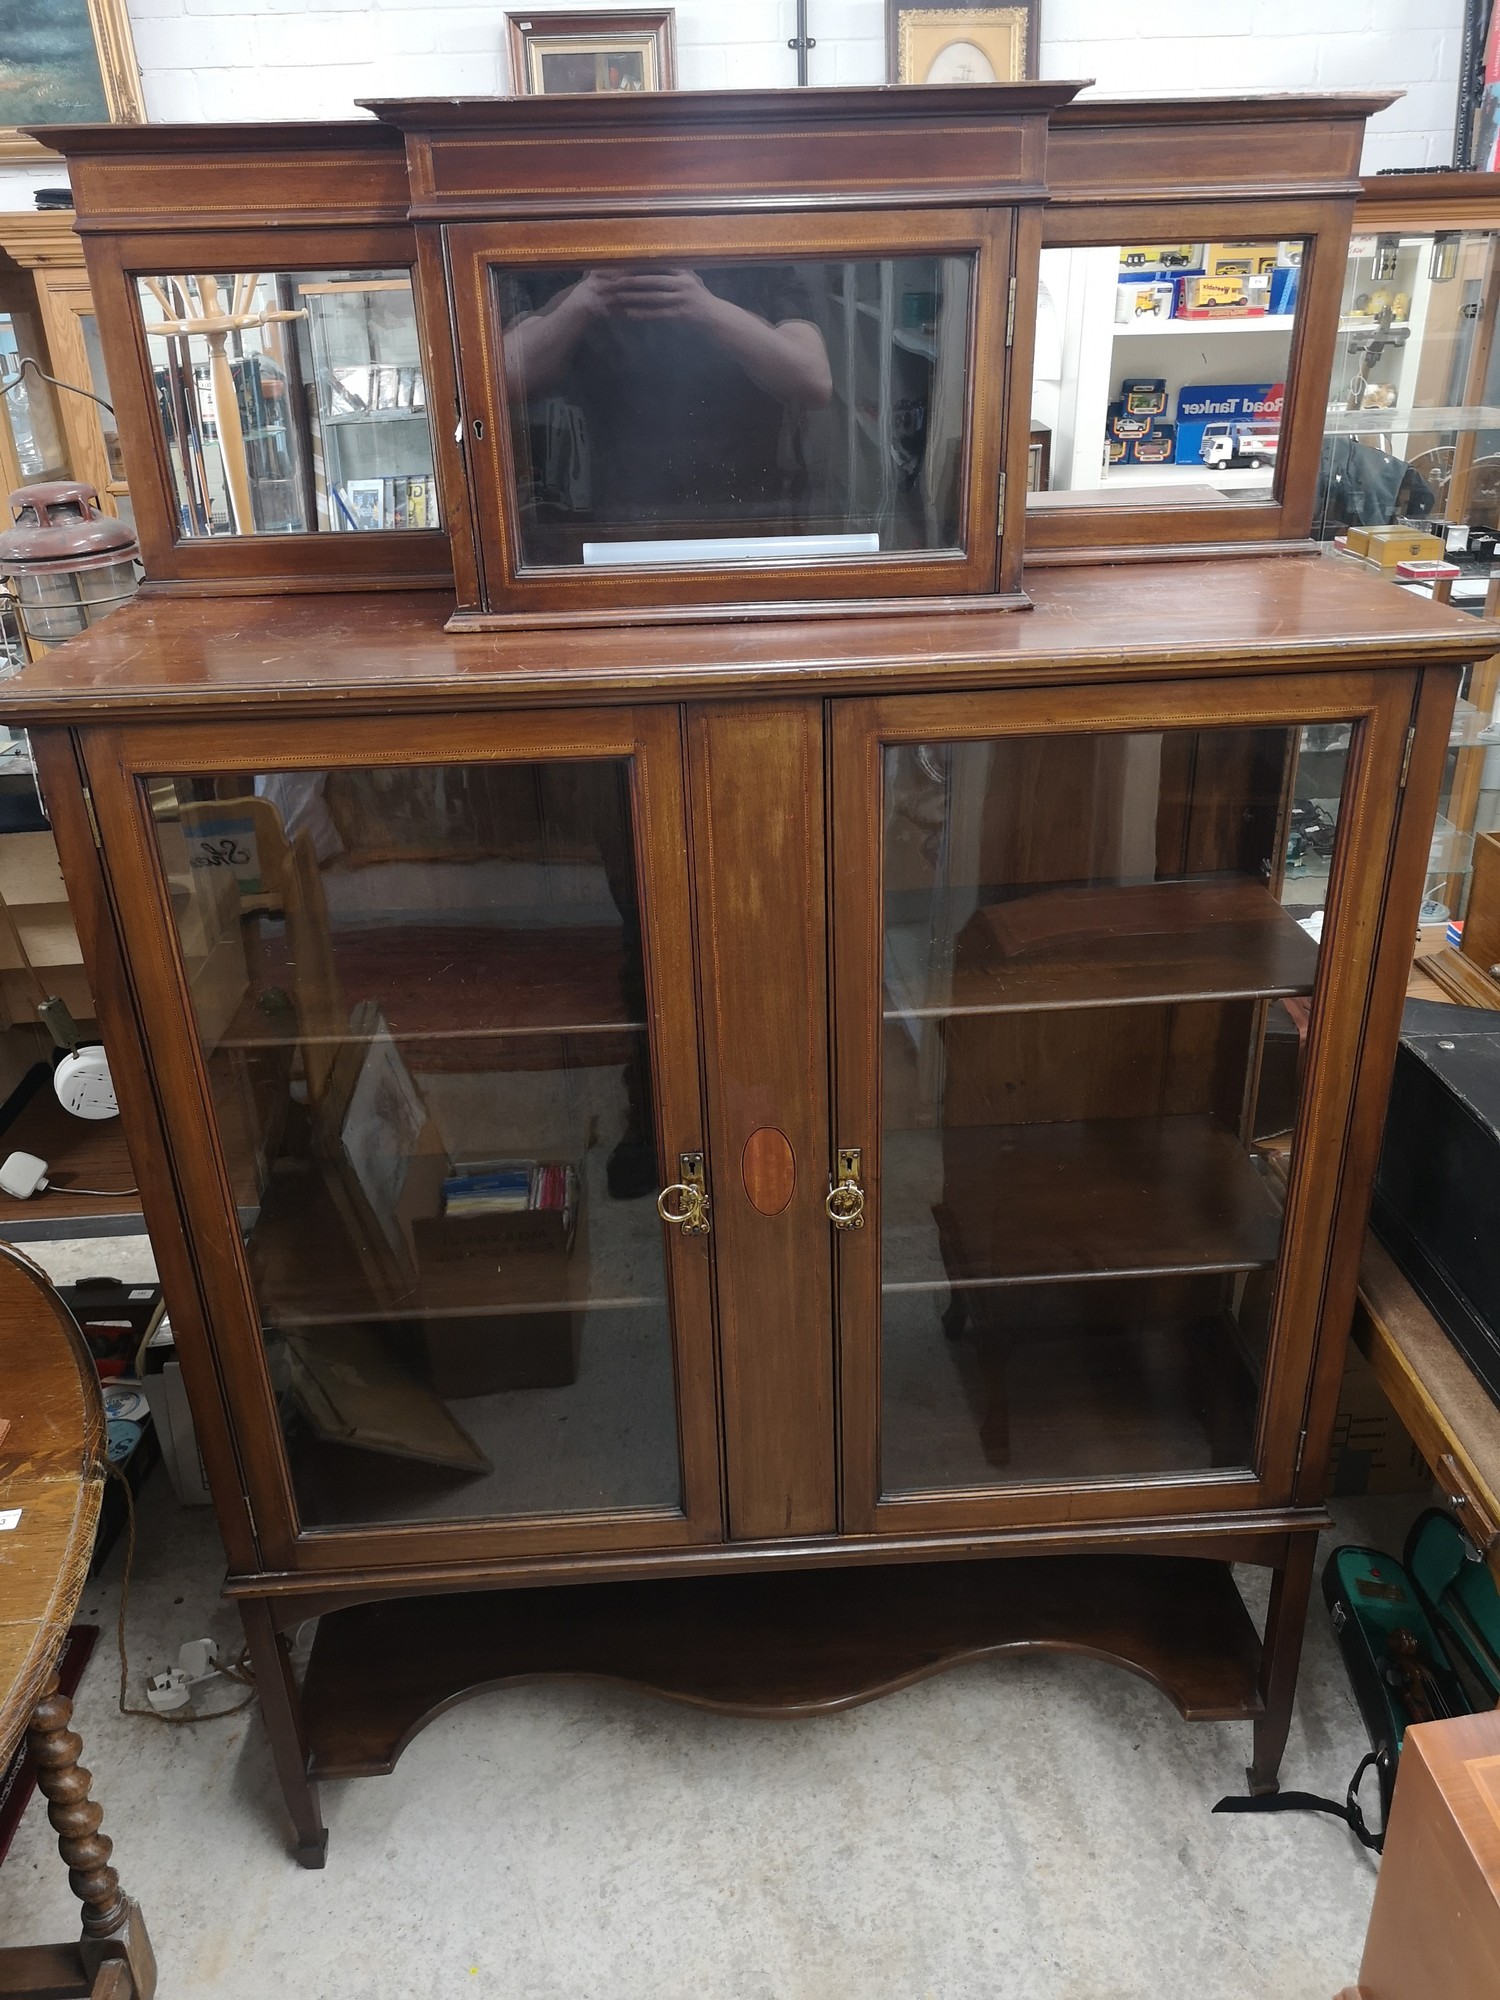 Large Edwardian mirrored topped display cabinet.